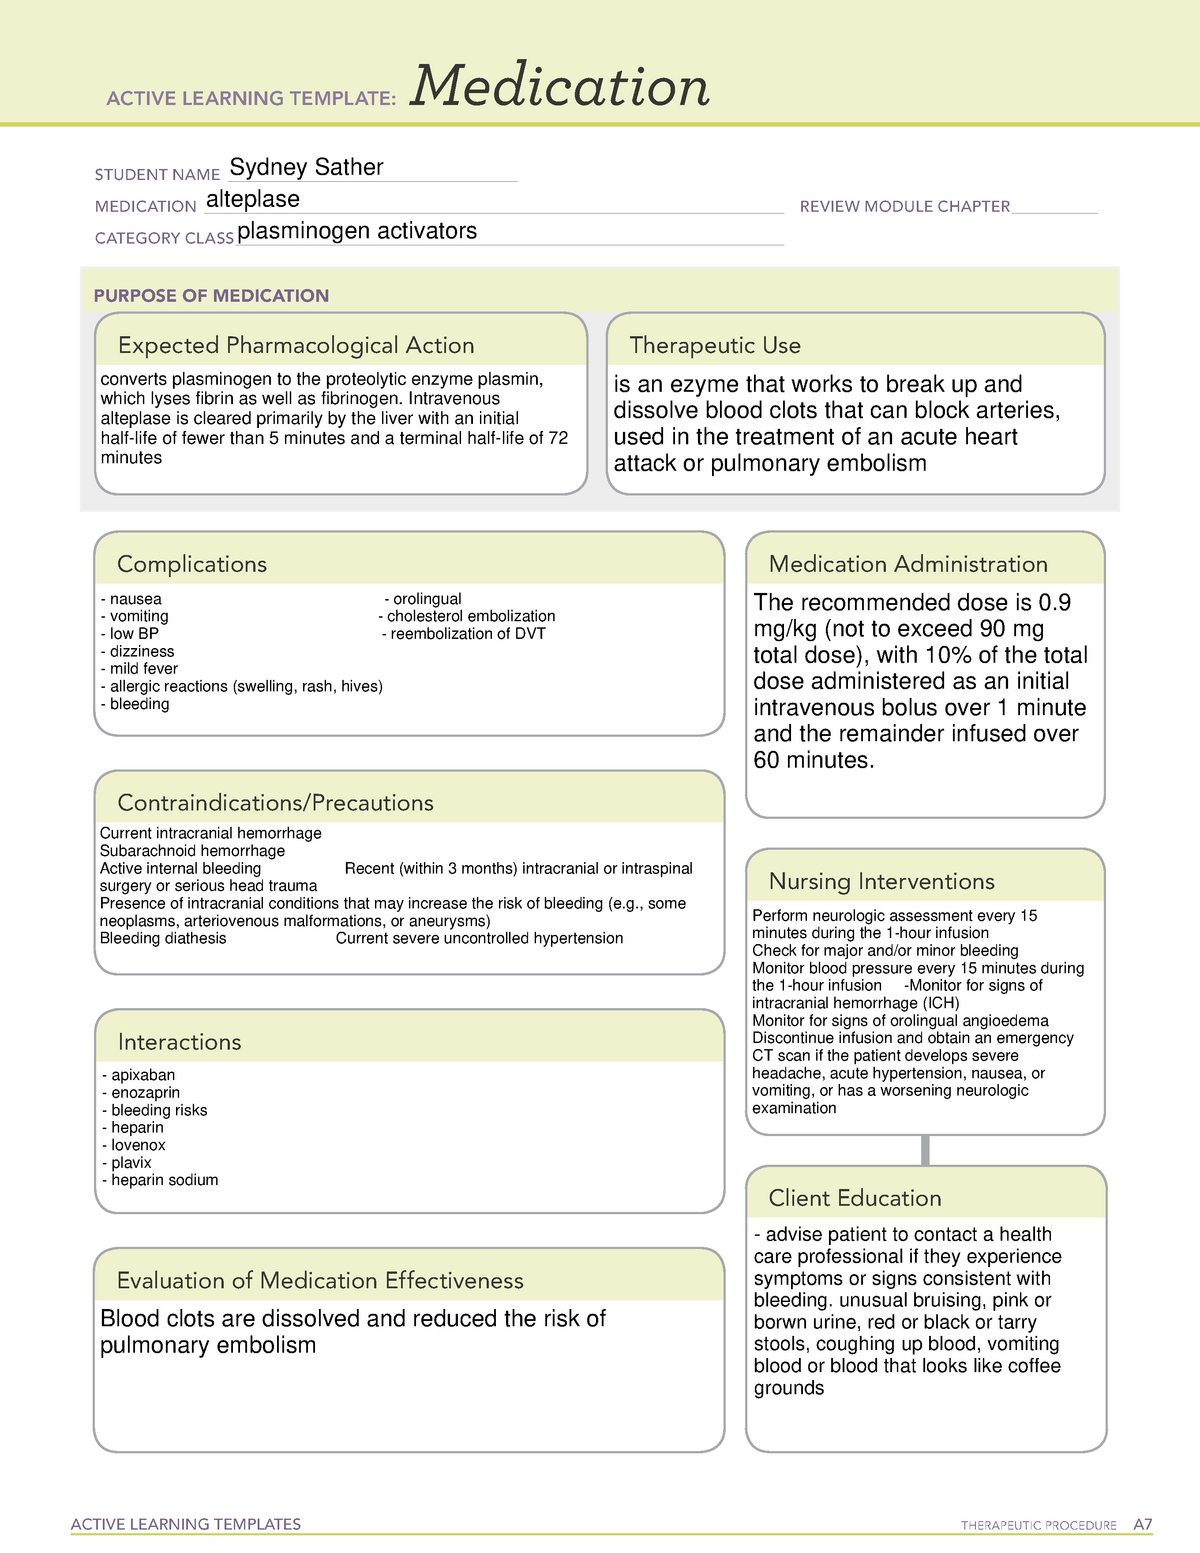 alteplase-template-active-learning-templates-therapeutic-procedure-a-medication-student-name